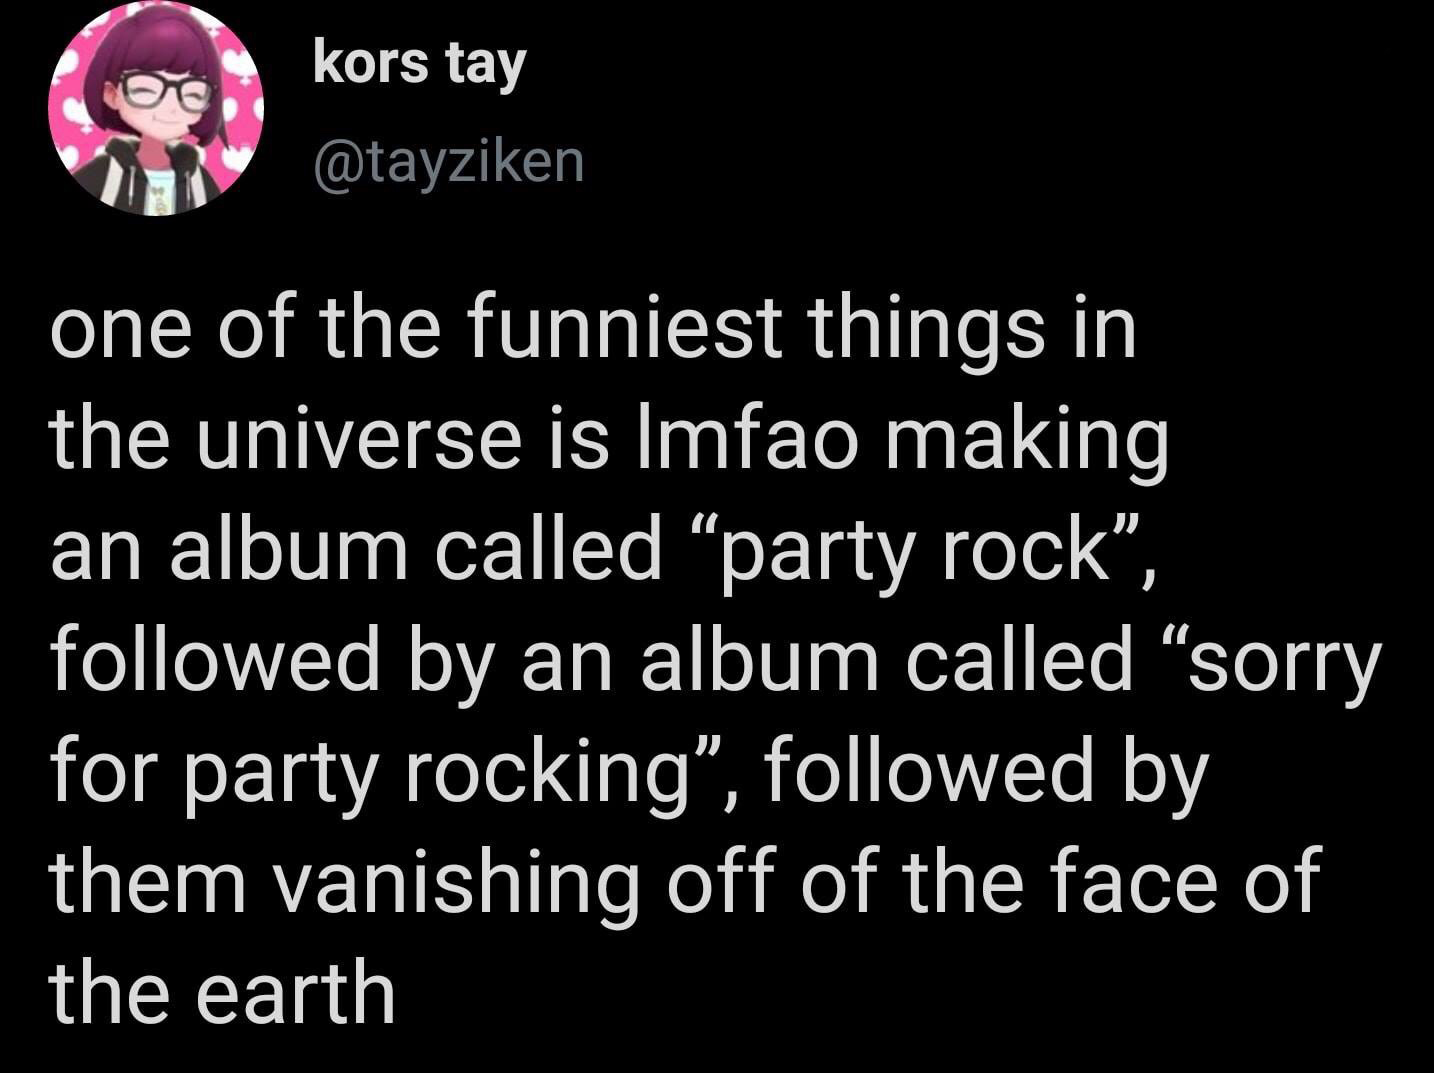 lyrics - kors tay one of the funniest things in the universe is Imfao making an album called party rock, ed by an album called sorry for party rocking, ed by them vanishing off of the face of the earth